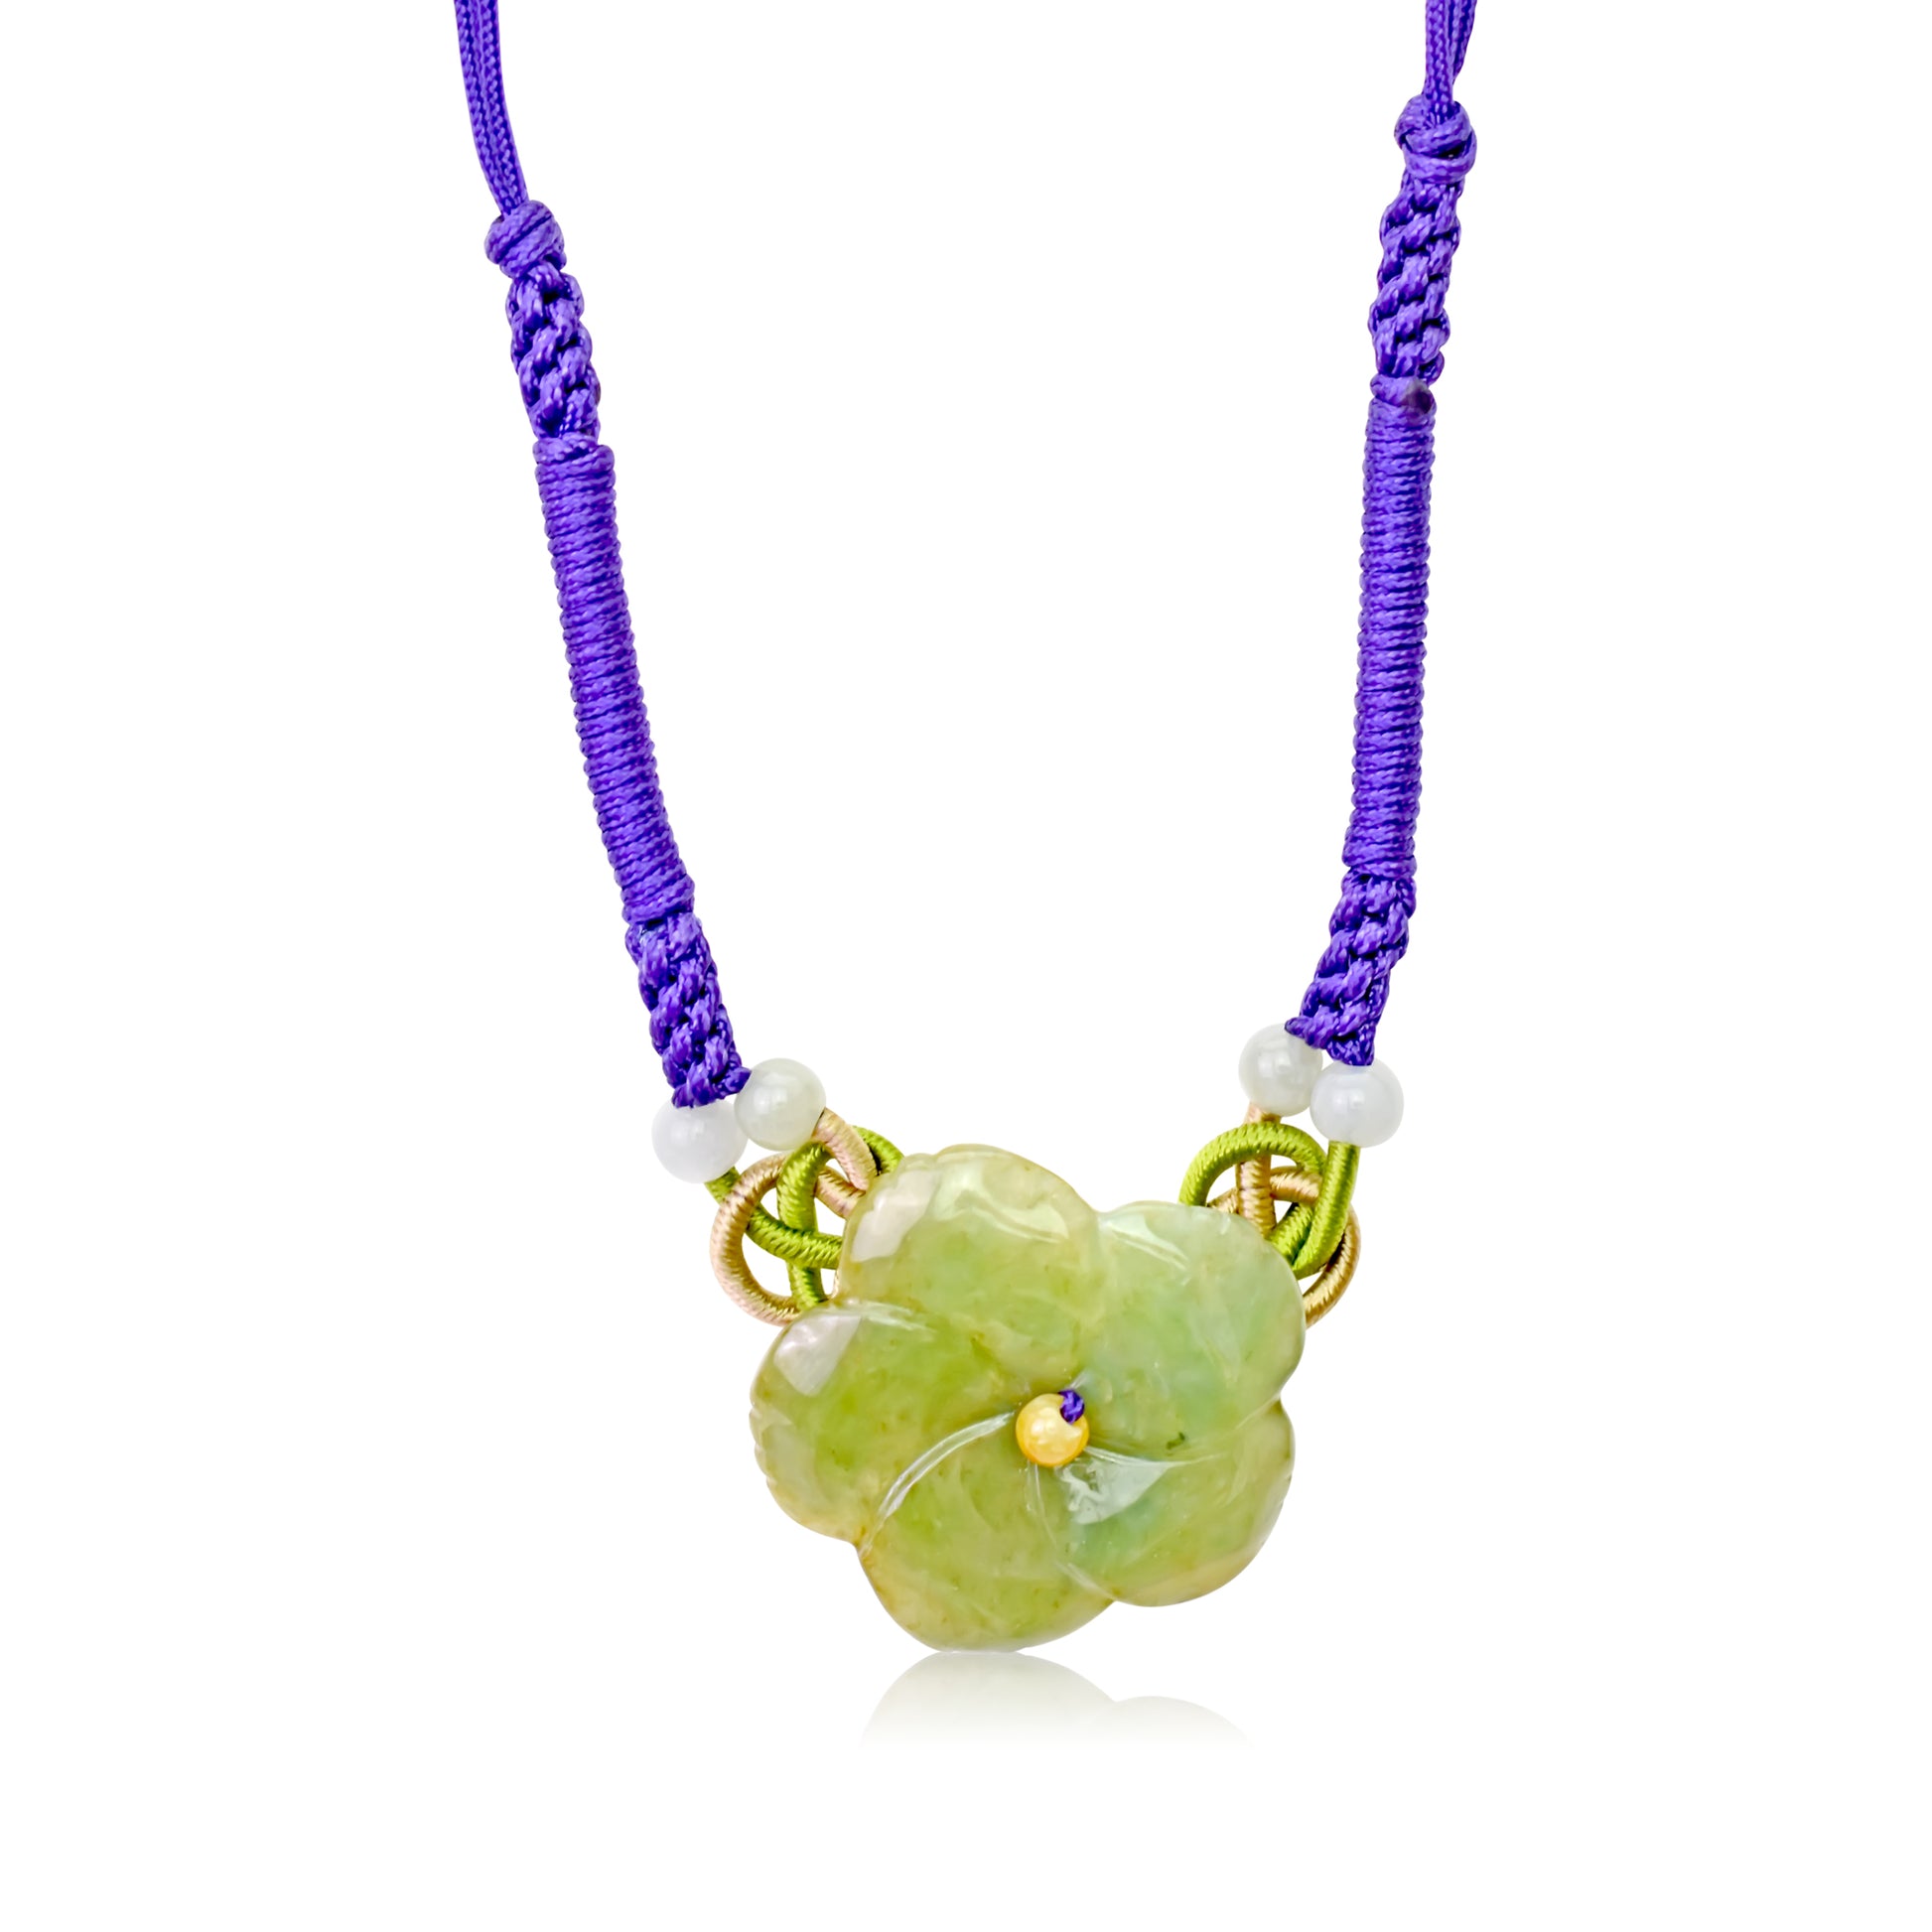 Get the Look You Crave with the Clematis Blossom Jade Necklace with Purple Cord